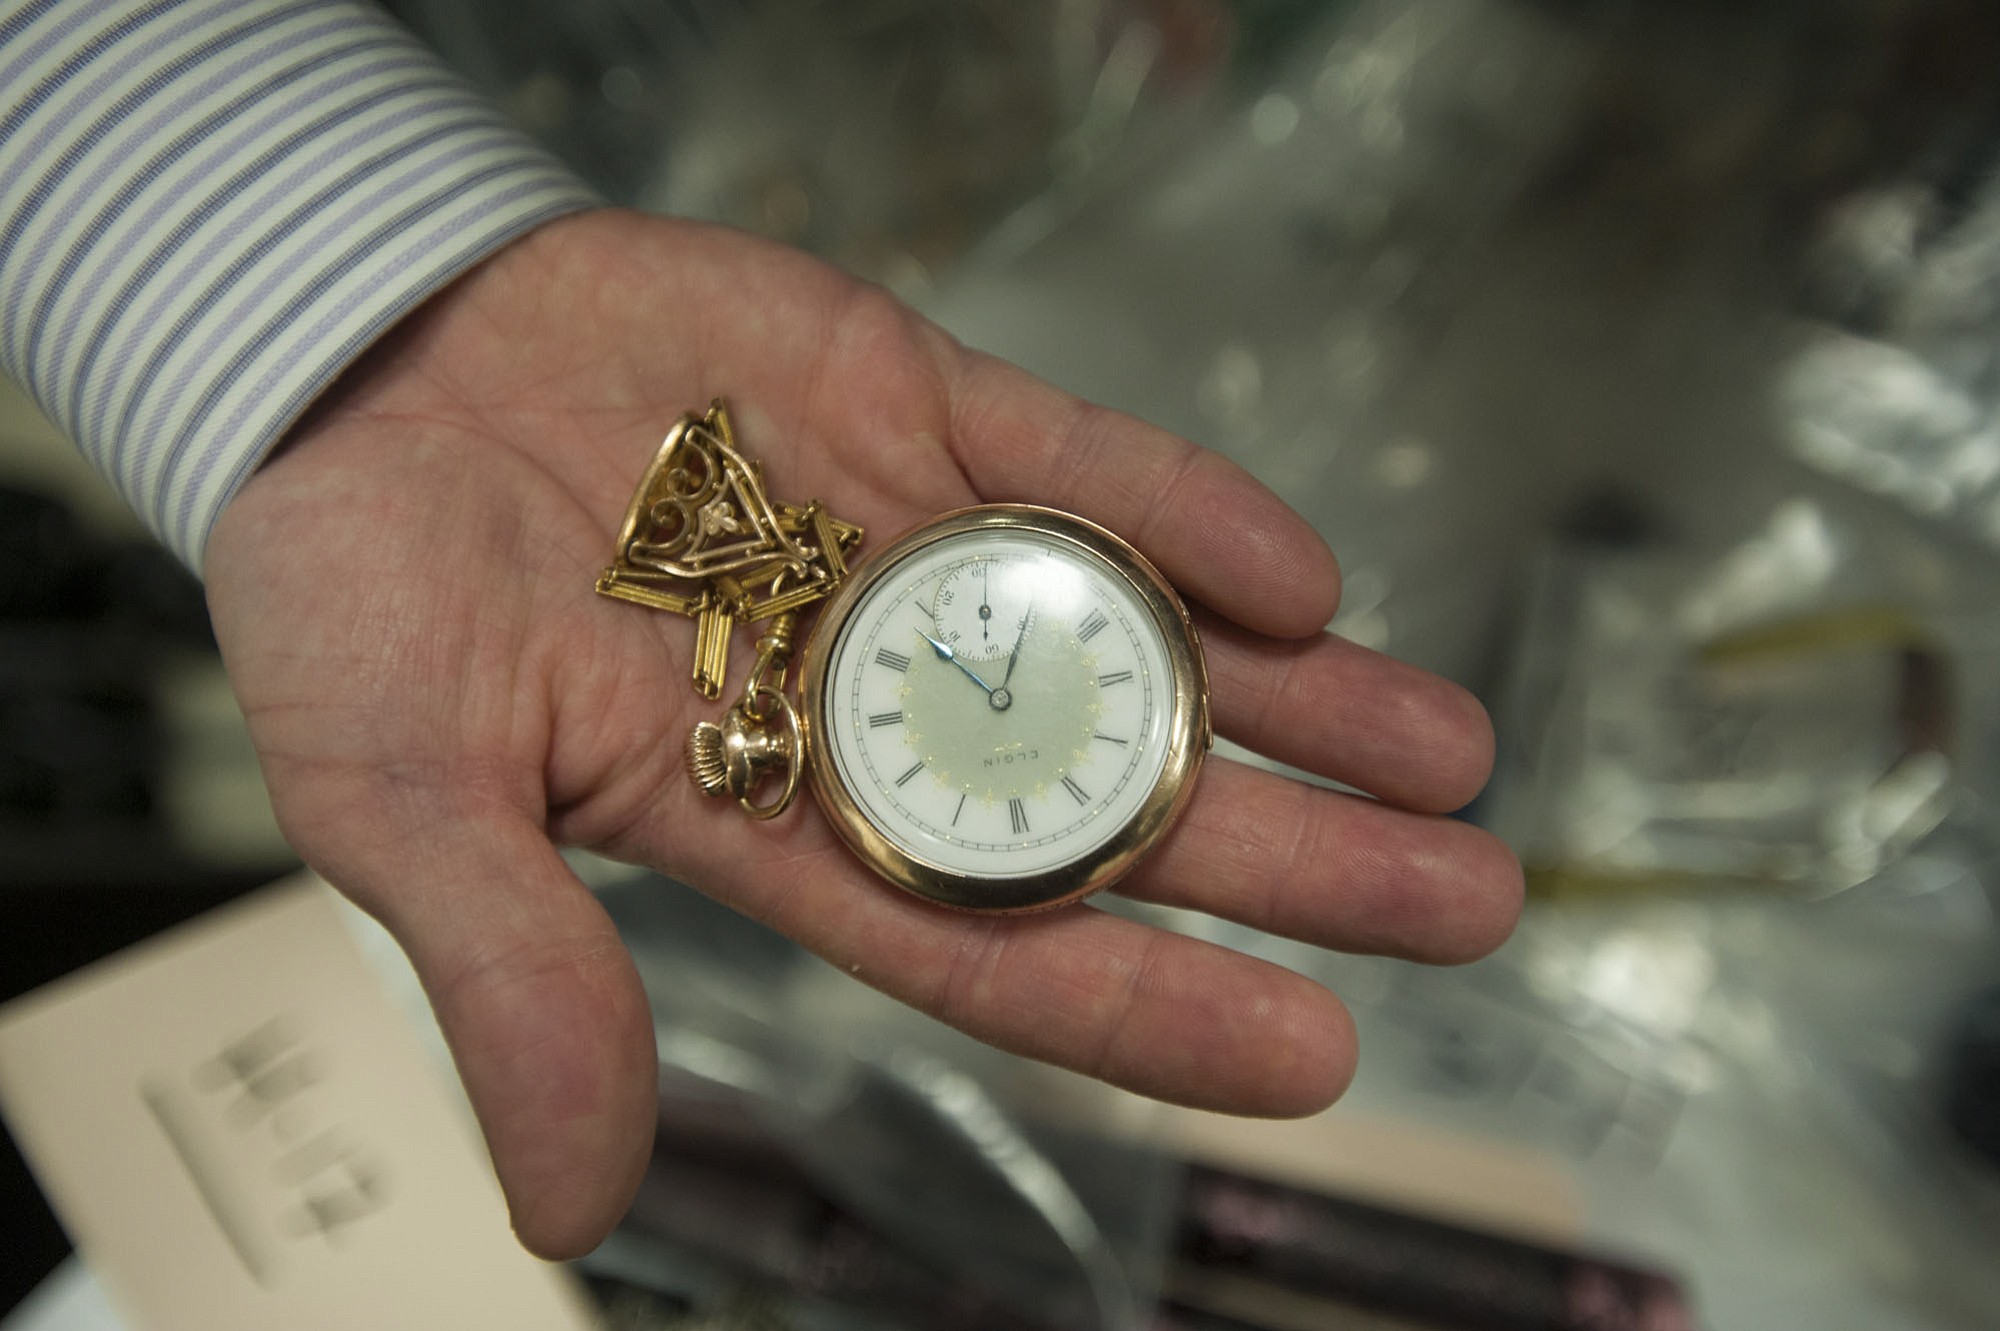 Ed Garrow holds a pocket watch that was stolen from his house in February.